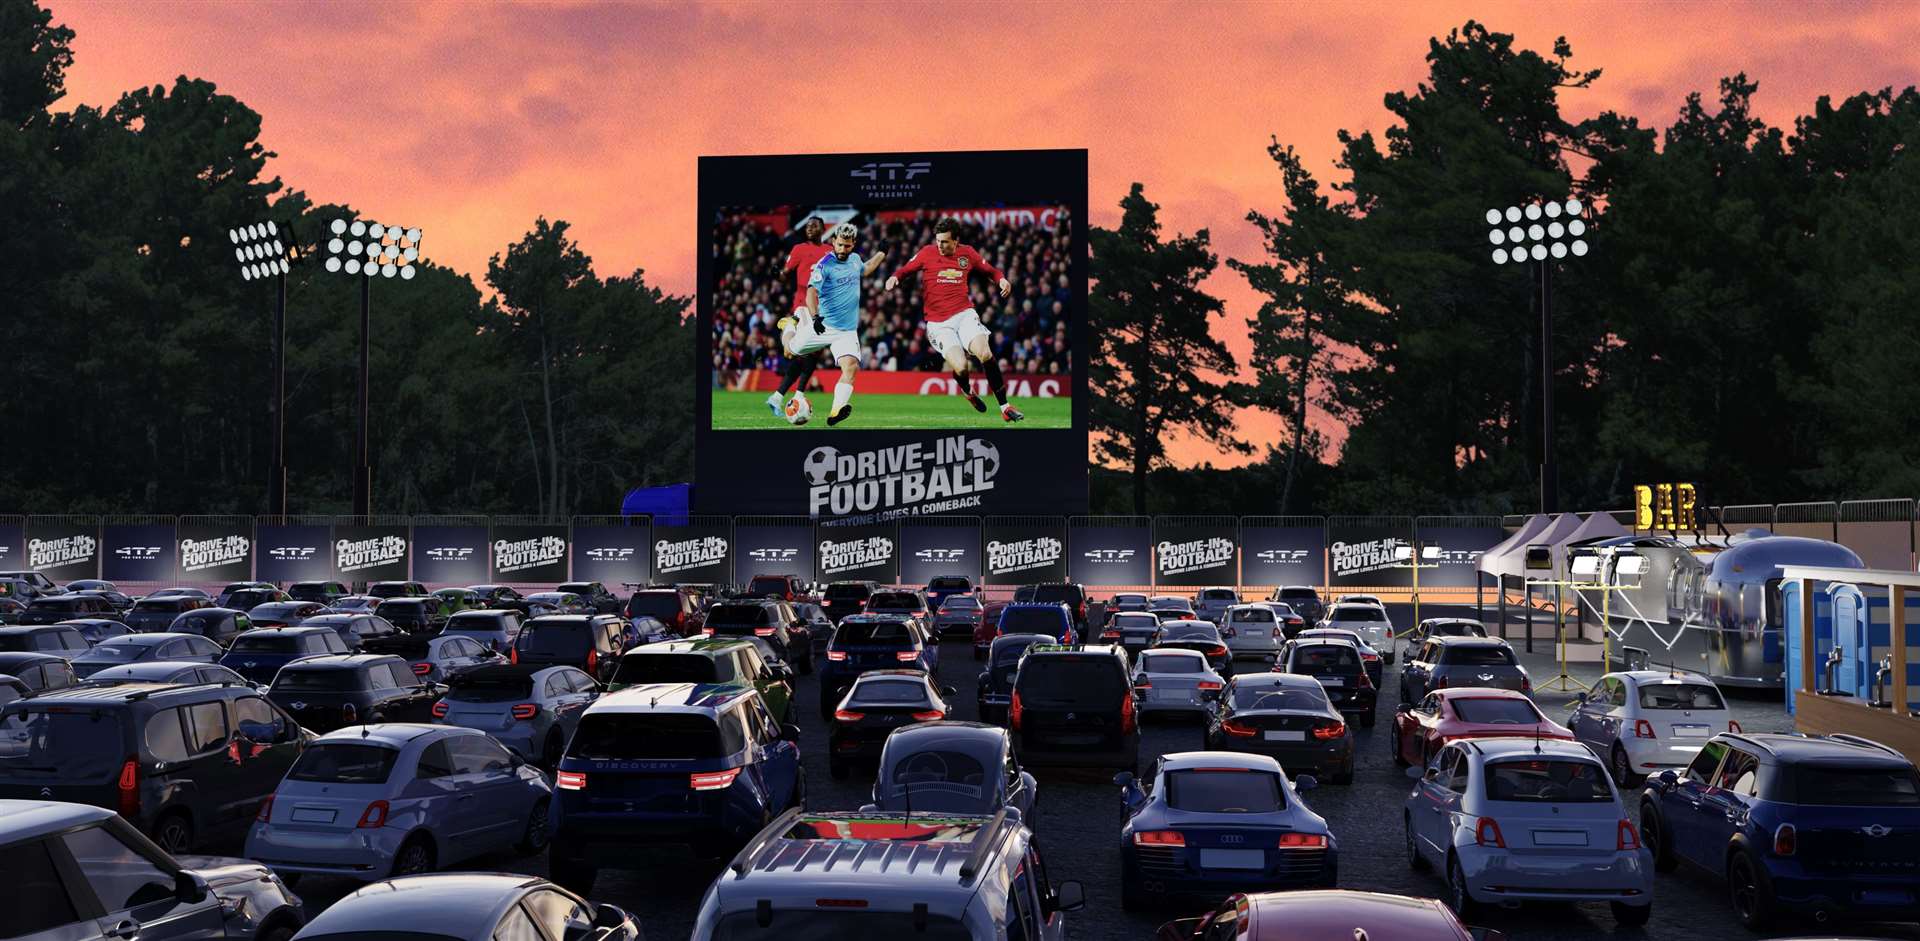 Drive-in football is a first say organisers